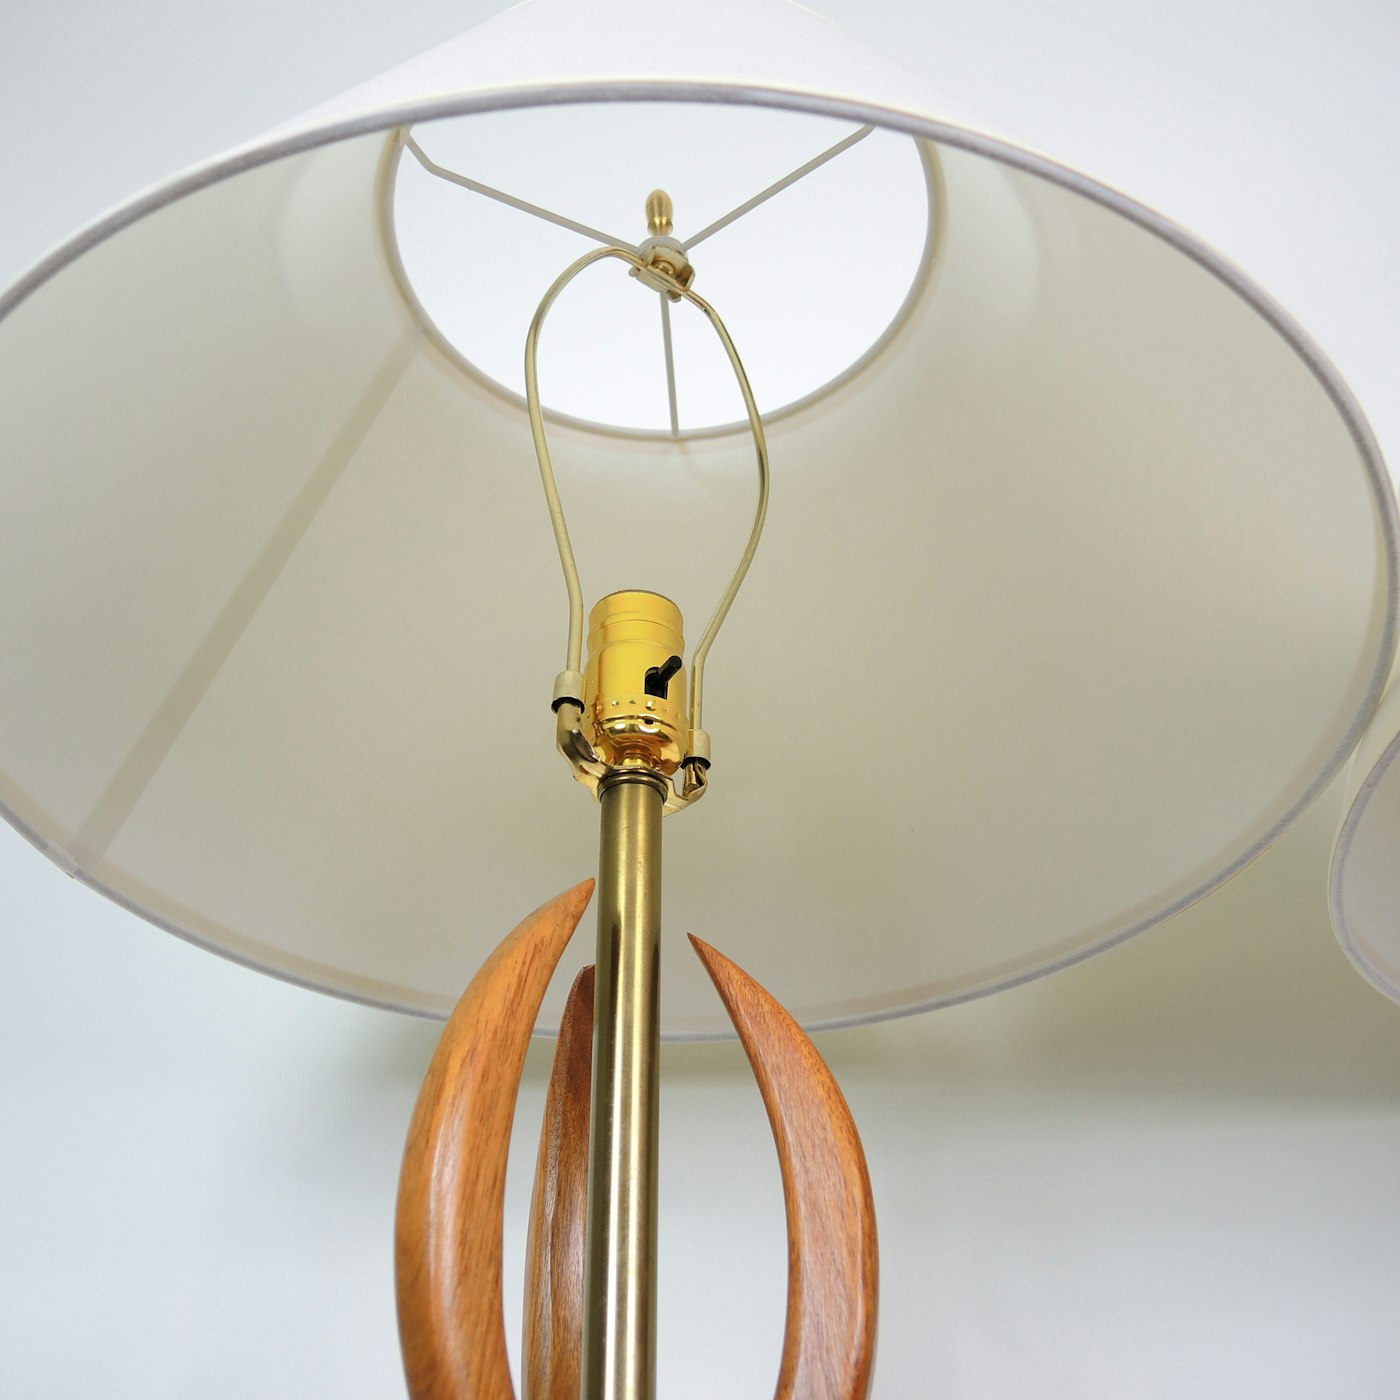 Pair of Mid Century Modern Table Lamps | EBTH